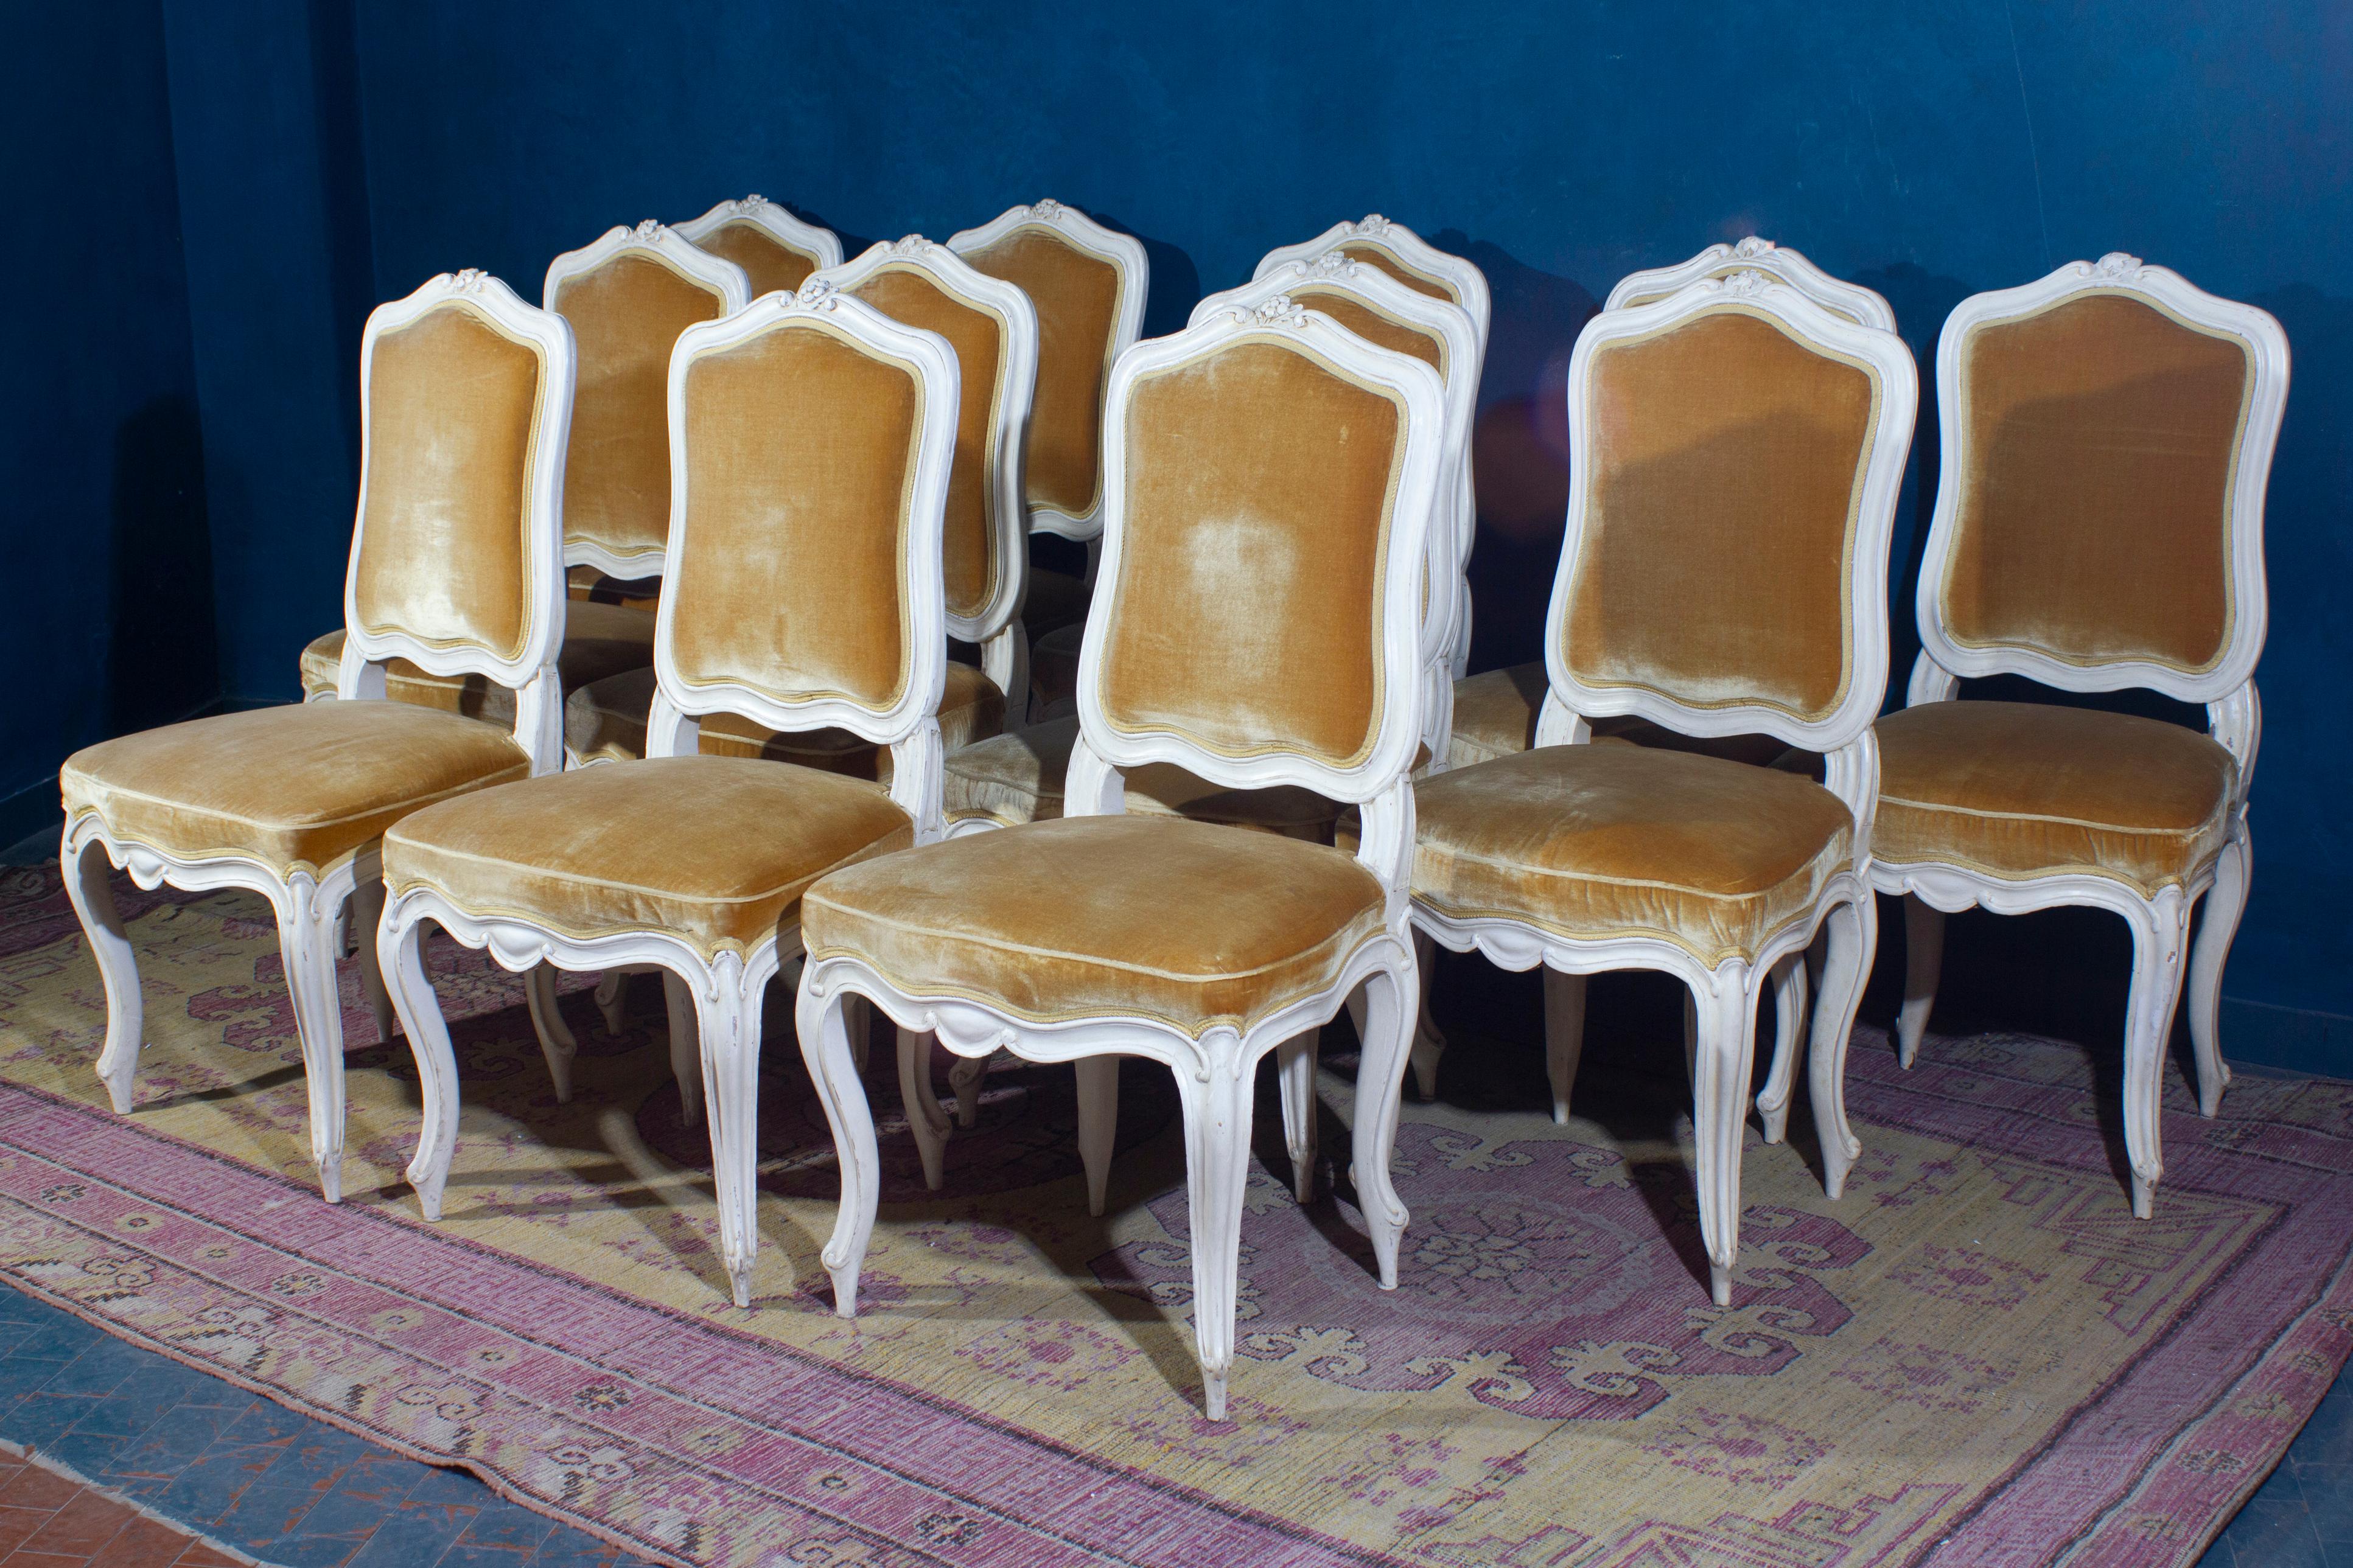 A fine set of 12 French ivory painted chairs with gold color precious silk velvet upholstery in very good condition. 
6 chairs are original 18' century and 6 are made in the 20' century.

